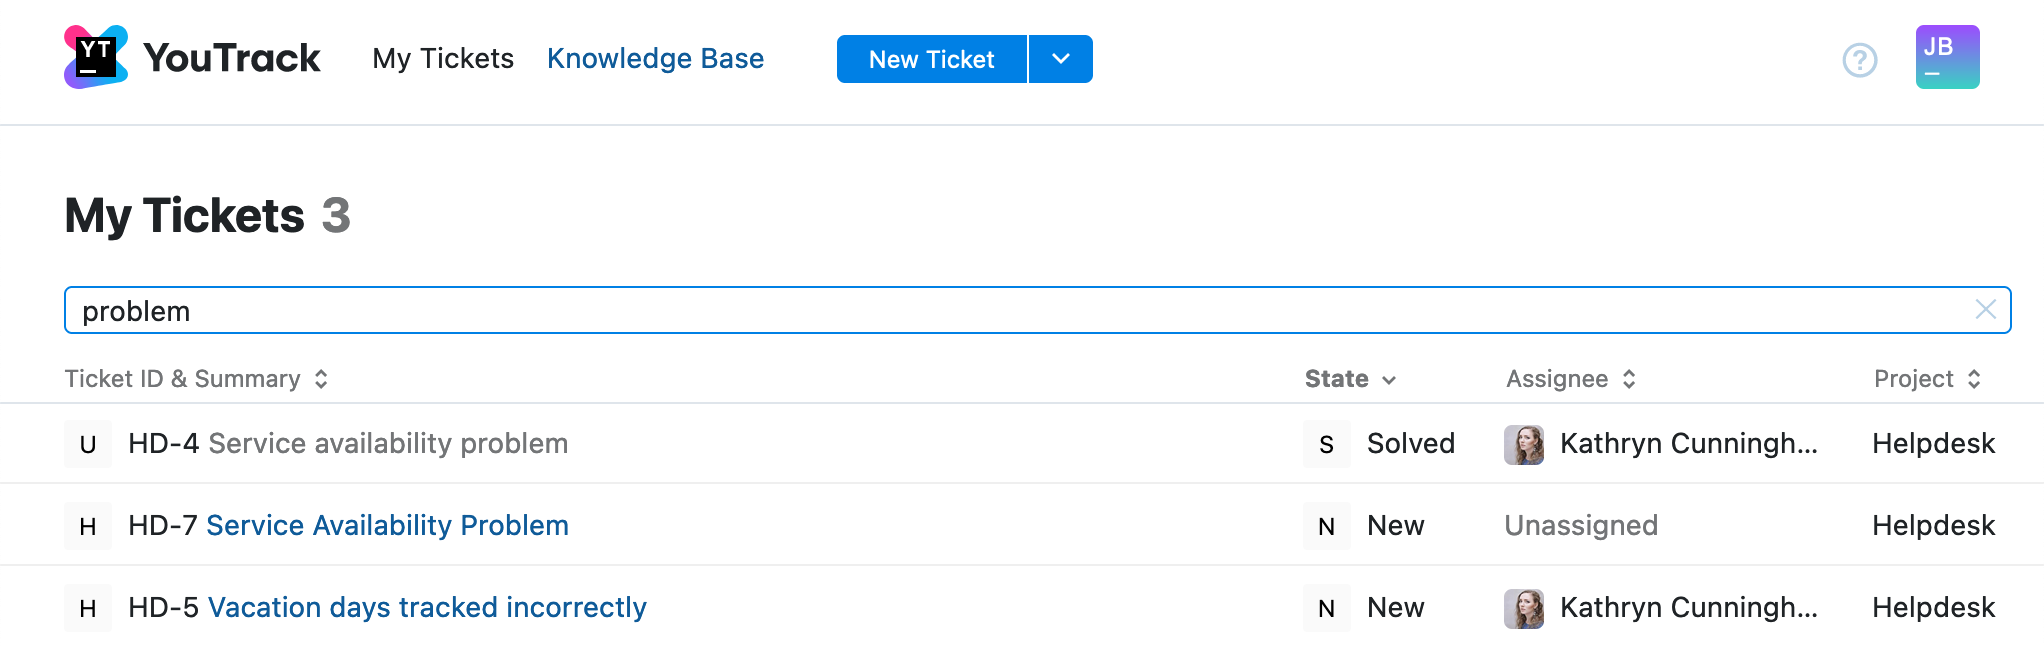 Type keywords to filter tickets